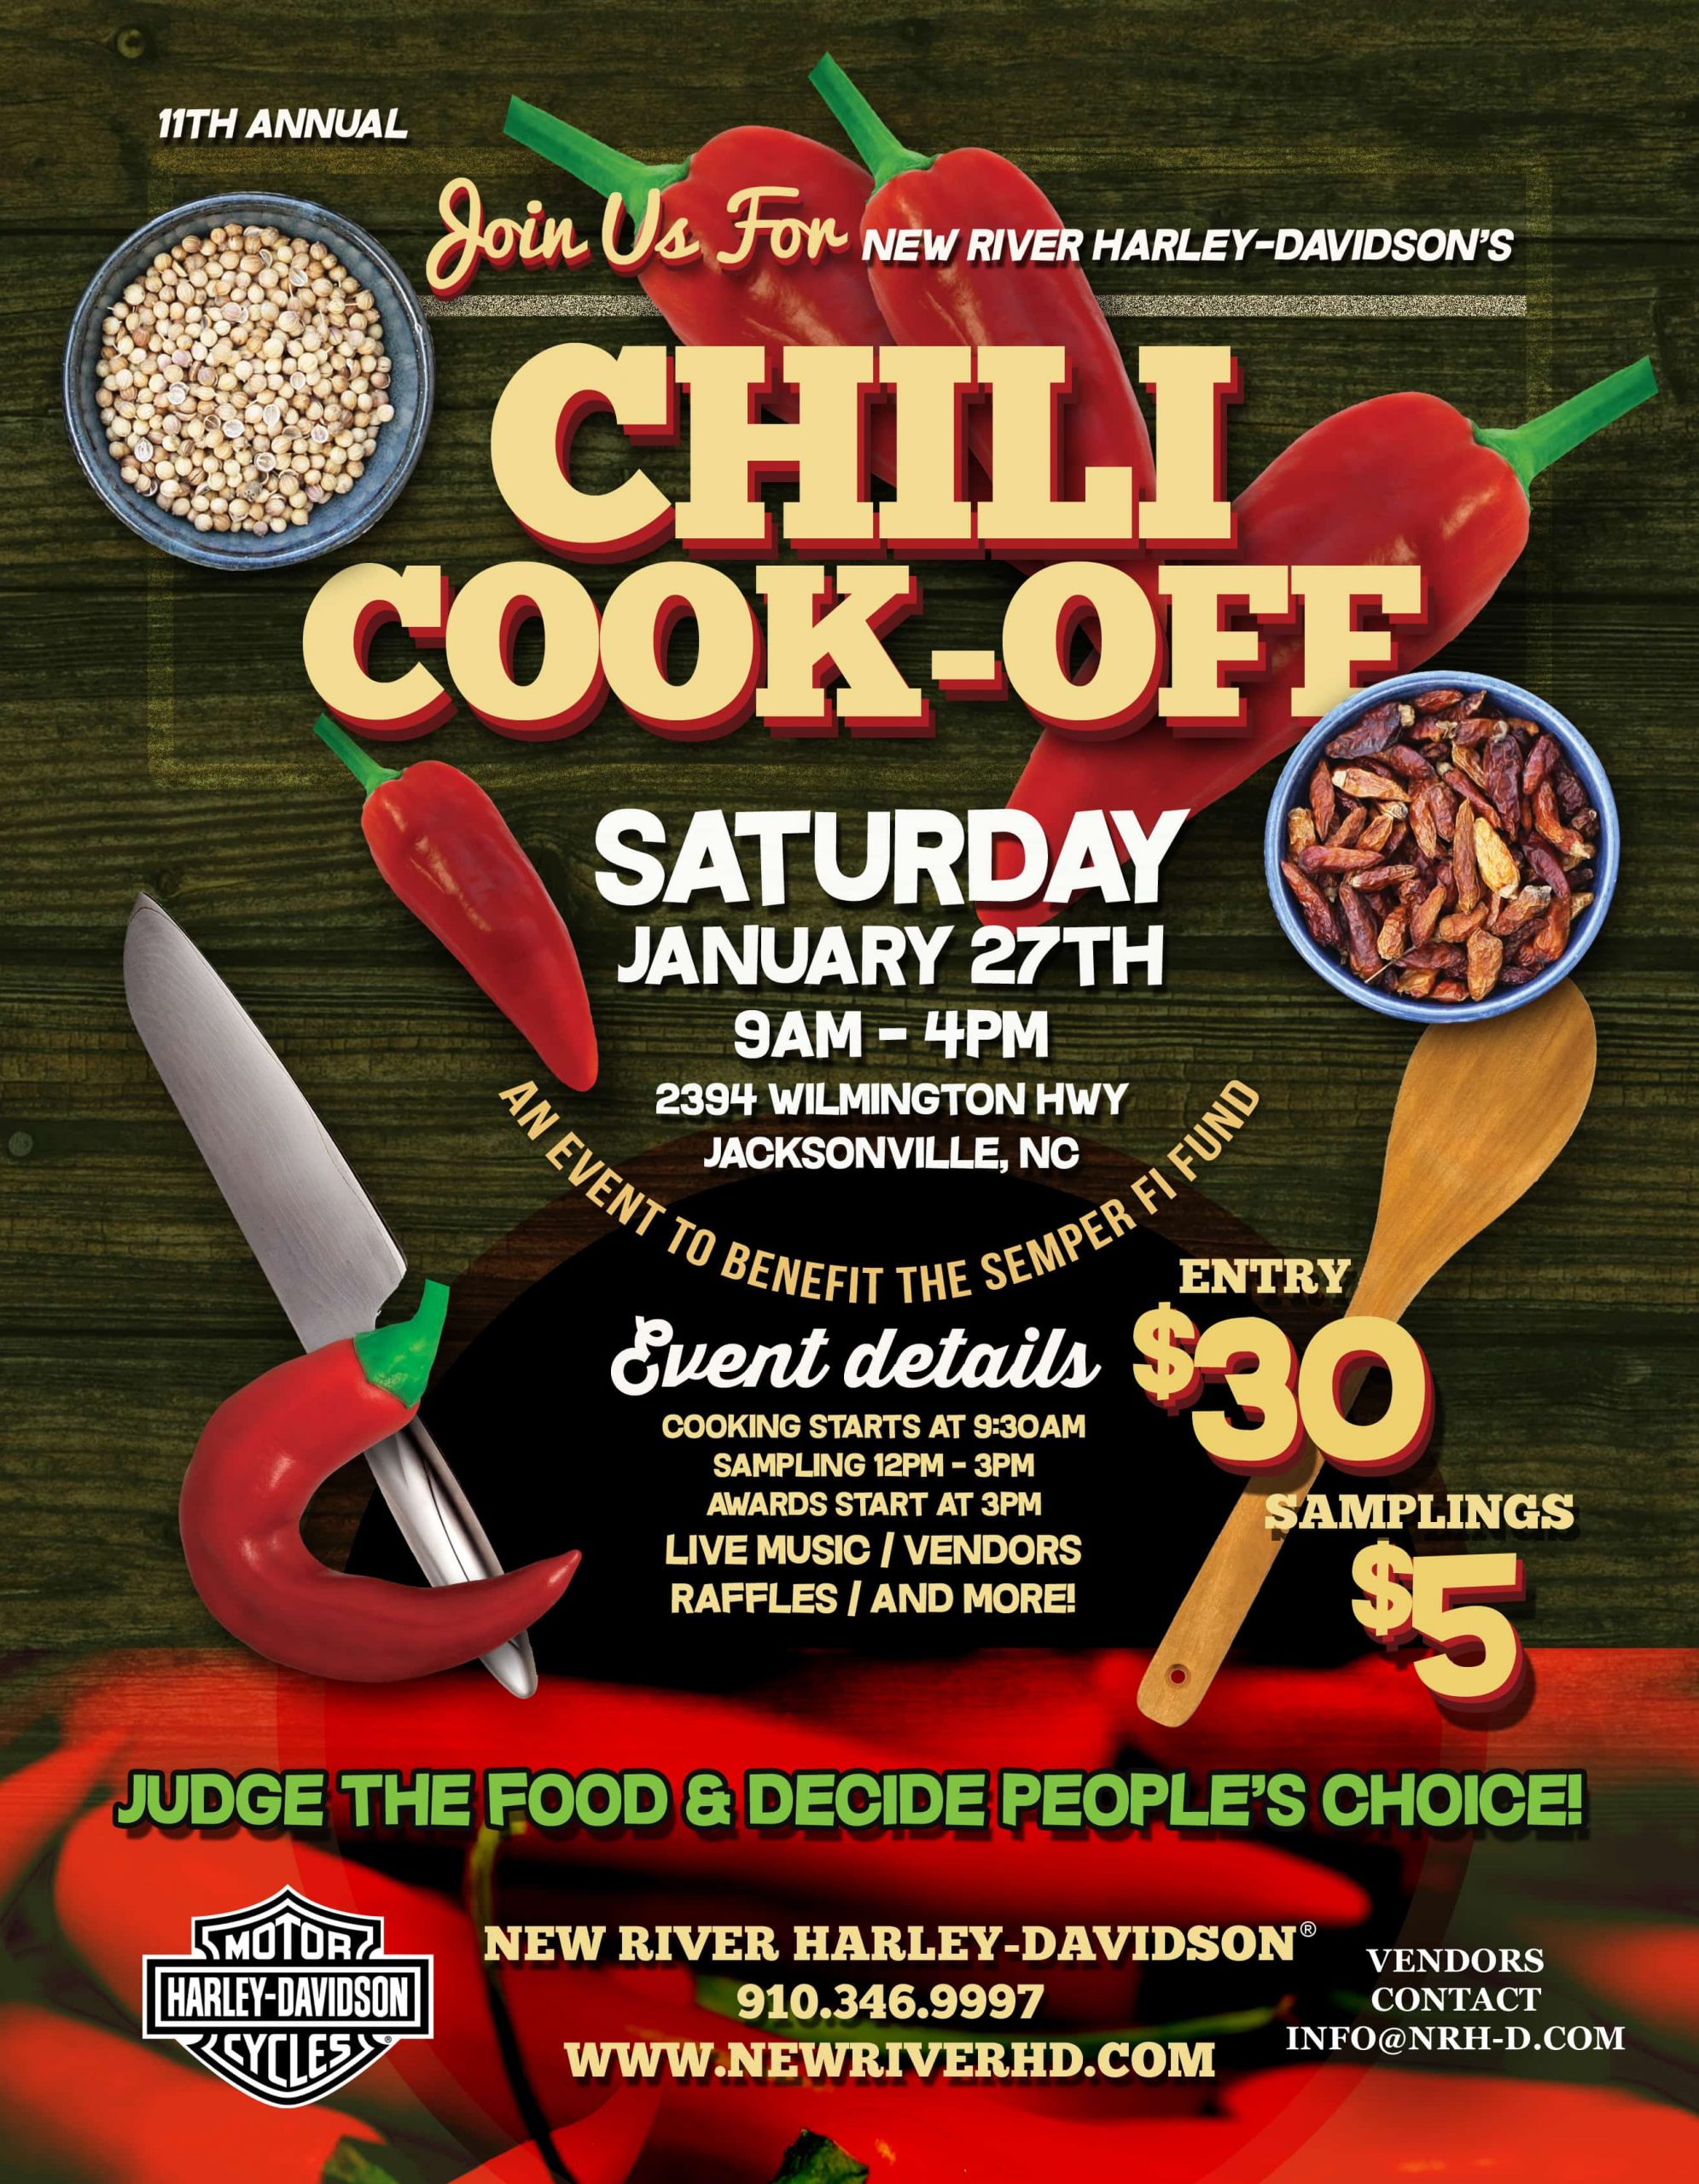 free chili cook off flyer template powerpoint, office chili cook off flyer template, chili cook off flyer free printable, chili flyer template pdf, chili cook off flyer ideas, restaurant grand opening flyer templates free